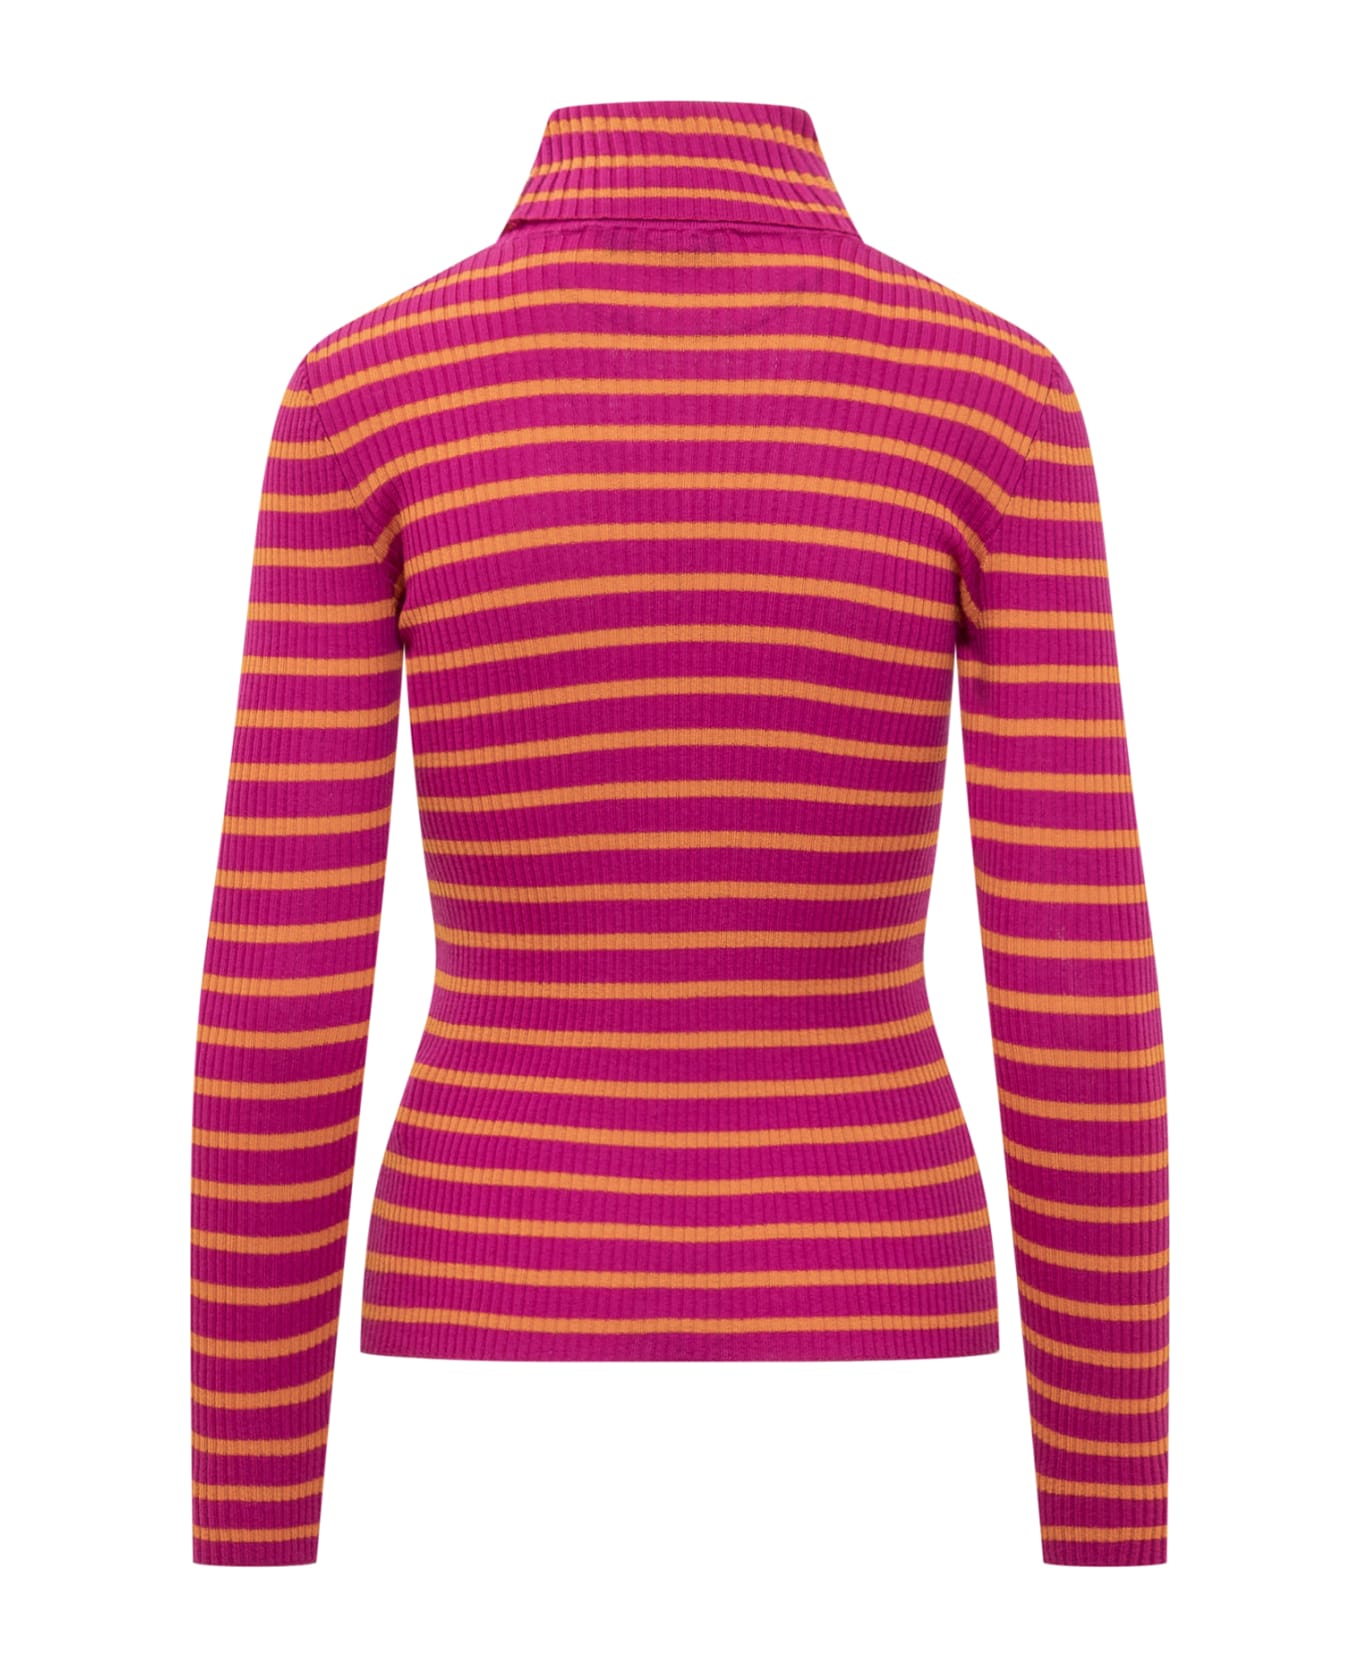 Jucca Ribbed Sweater - AMETISTA ニットウェア